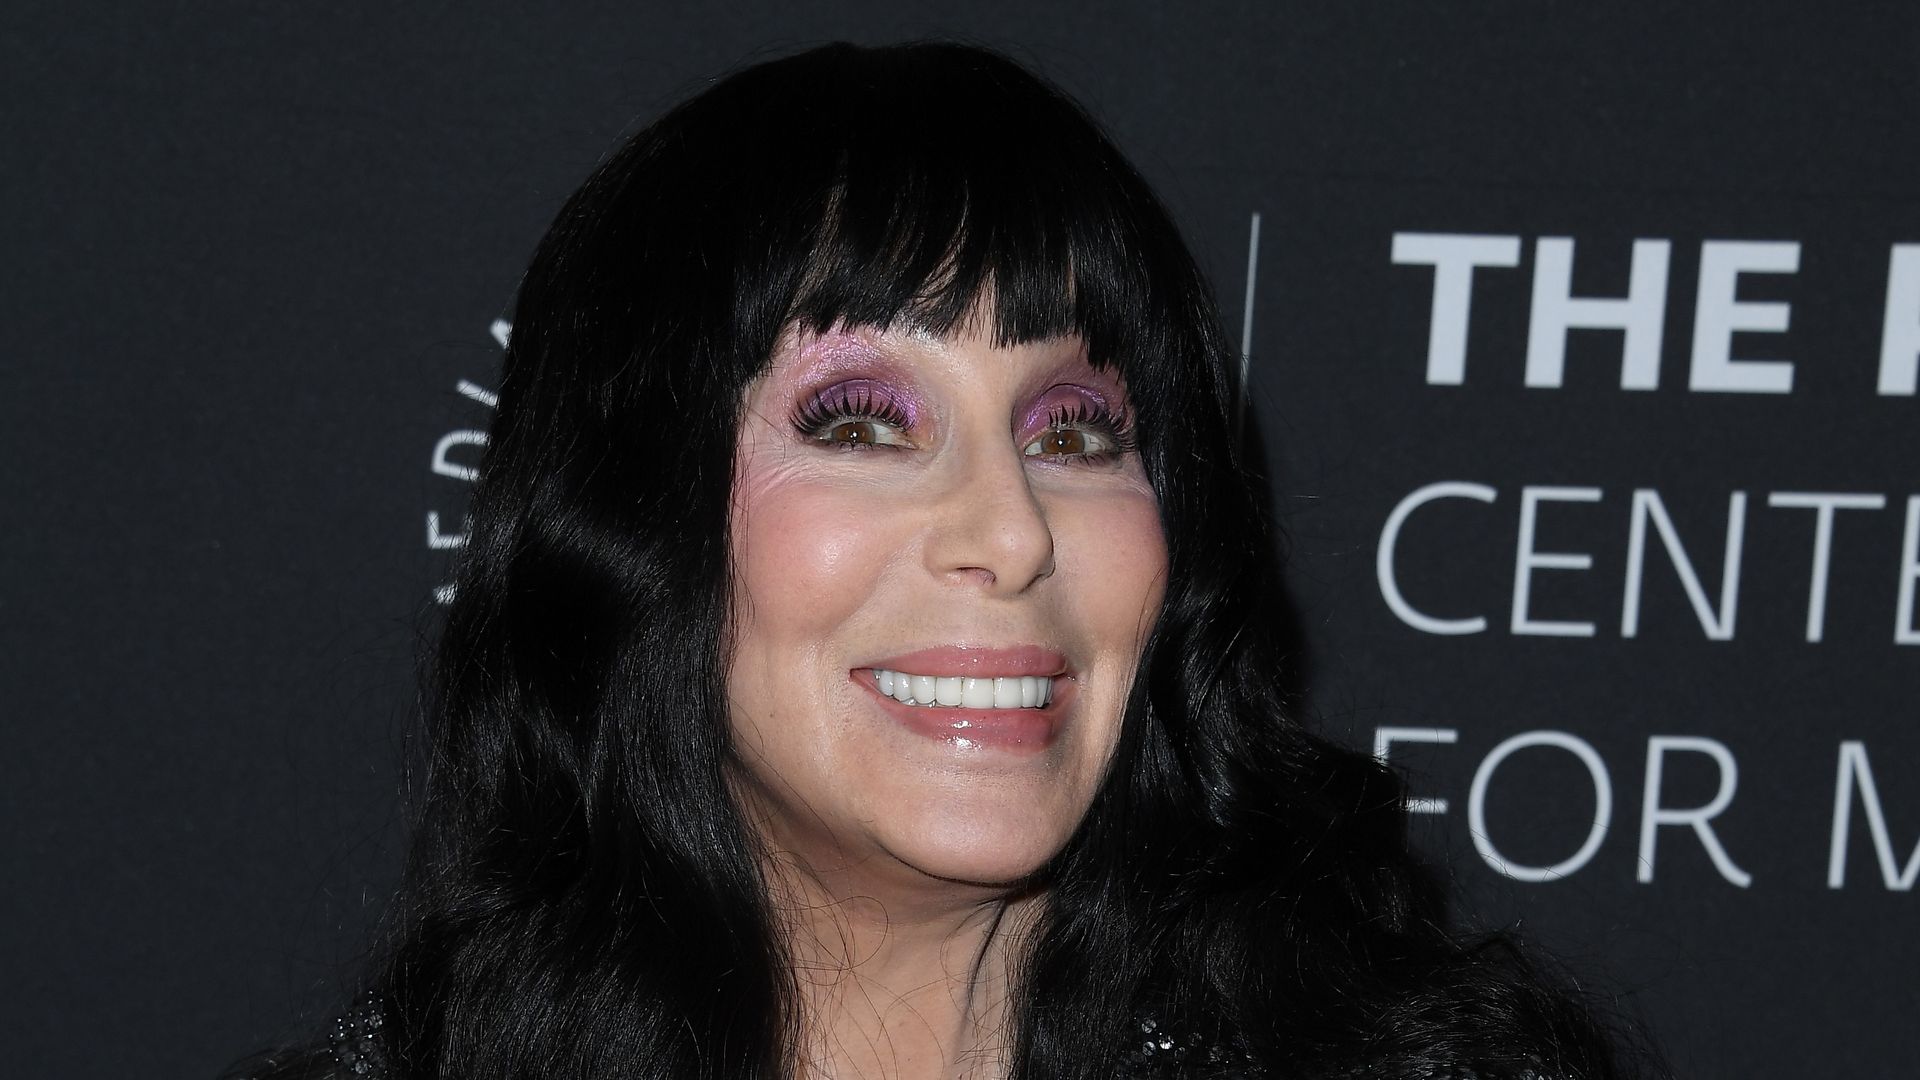 Cher arrives at the "Bob Mackie: Naked Illusion": A Legendary Evening With Bob Mackie, Carol Burnett, RuPaul Charles, Cher & Friends at Directors Guild Of America on May 13, 2024 in Los Angeles, California.